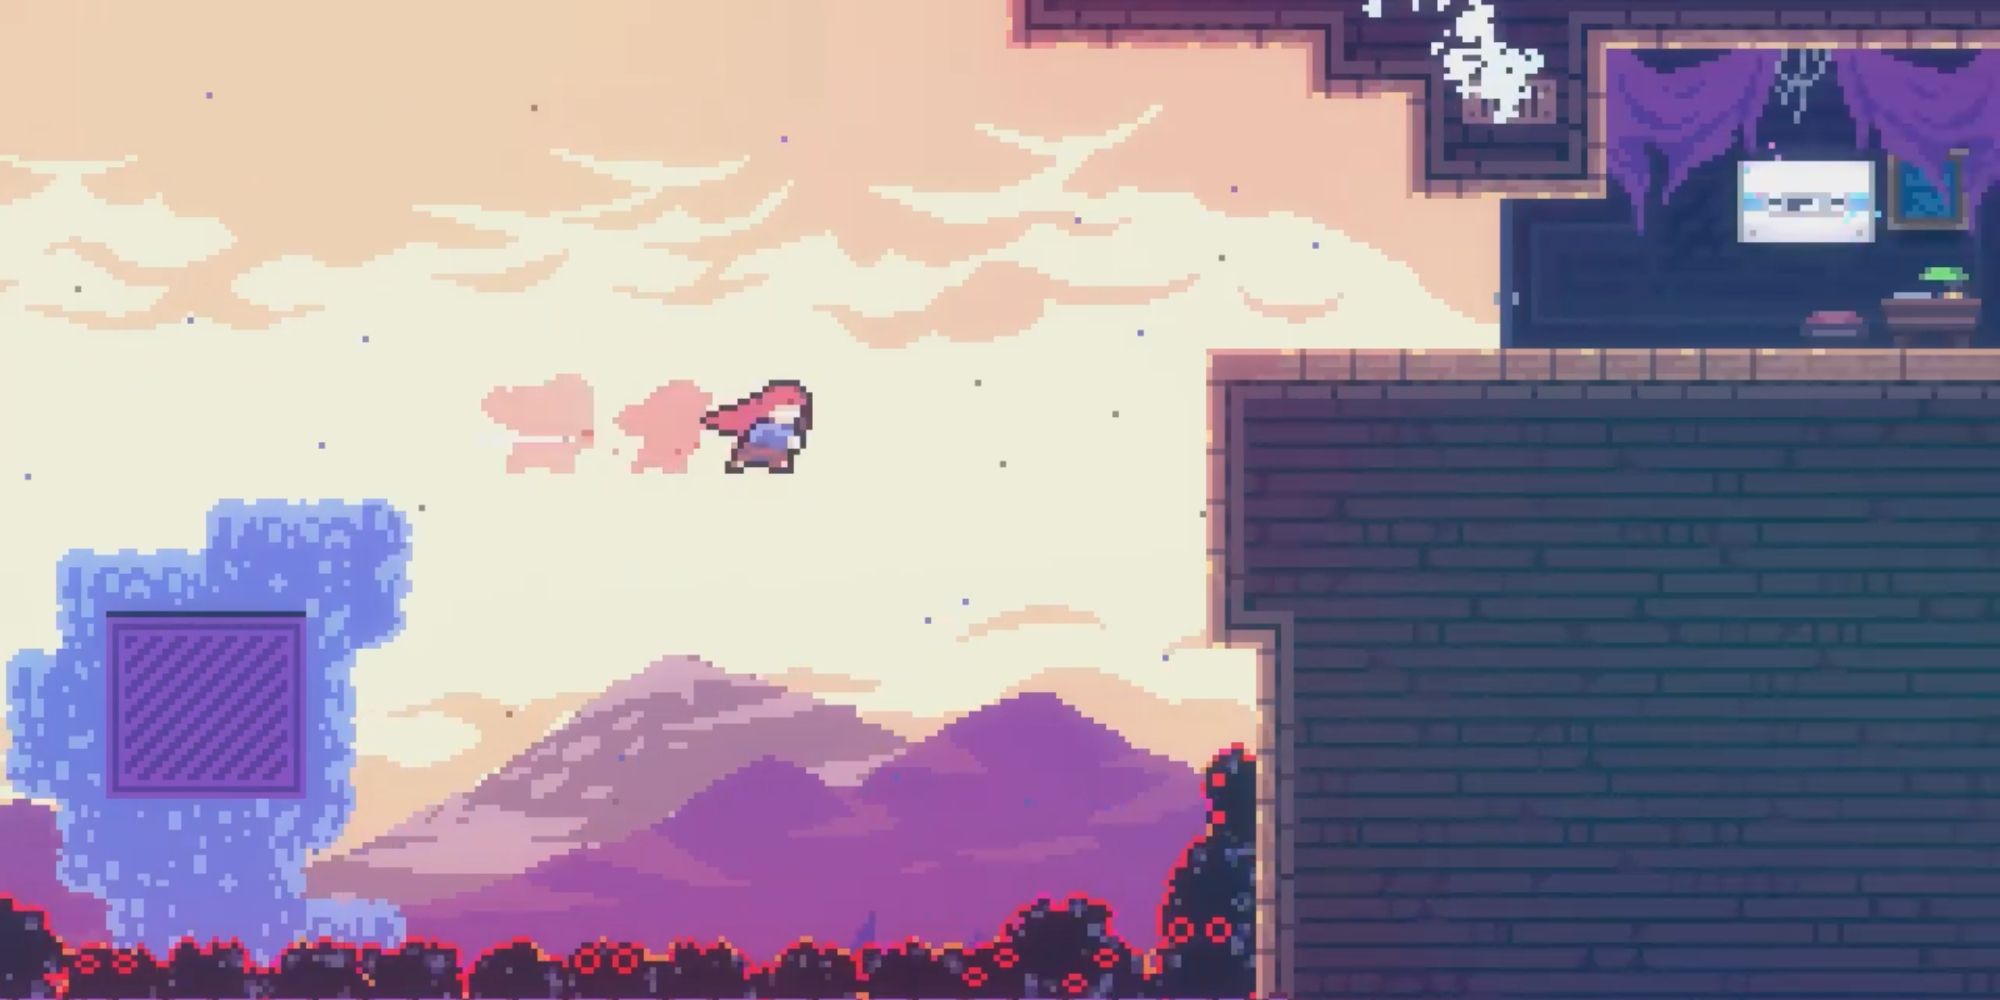 gameplay of celeste, showing play jump over gap